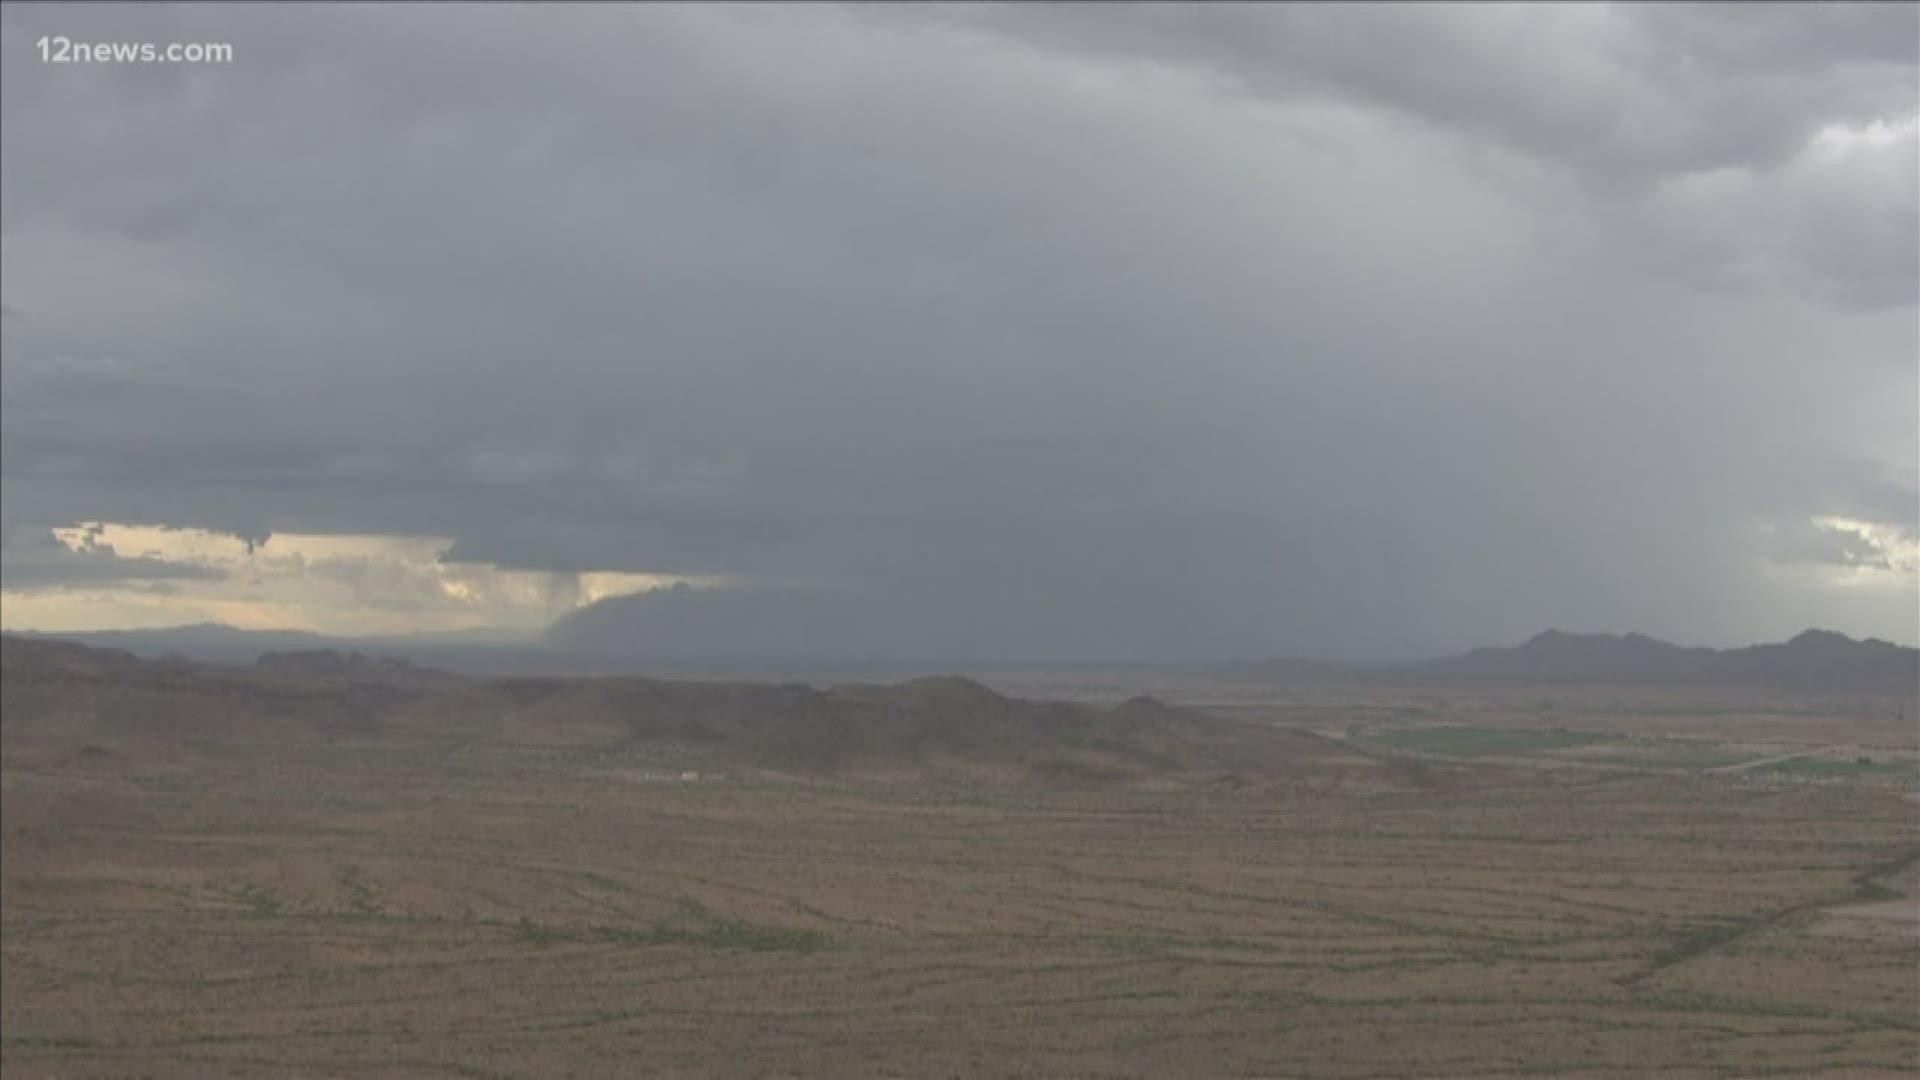 After a quite monsoon season, a wall of dust has formed southeast of the Valley. Storm clouds are also developing. The Valley has an isolated chance of storms. Areas east and south of the Valley have the best chance for rain.